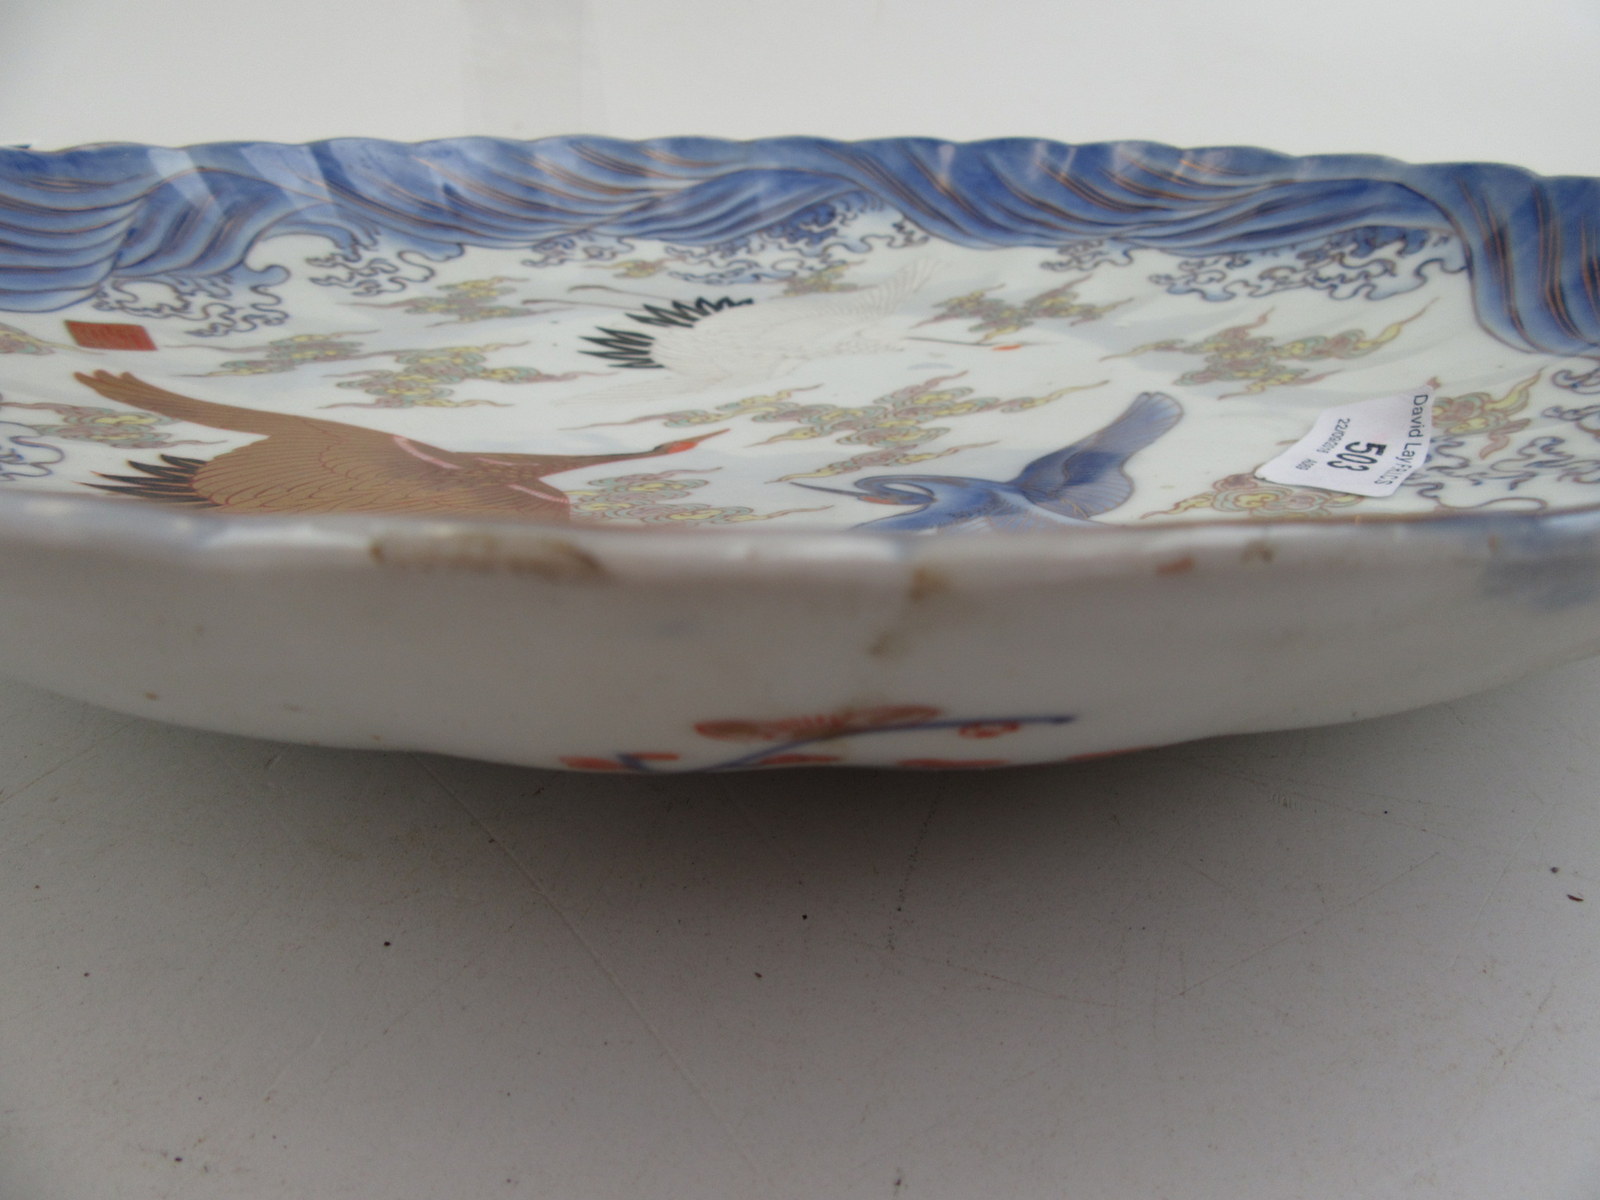 A Japanese Fukagawa dish, decorated with cranes in flight and bands of cloud, - Image 2 of 5